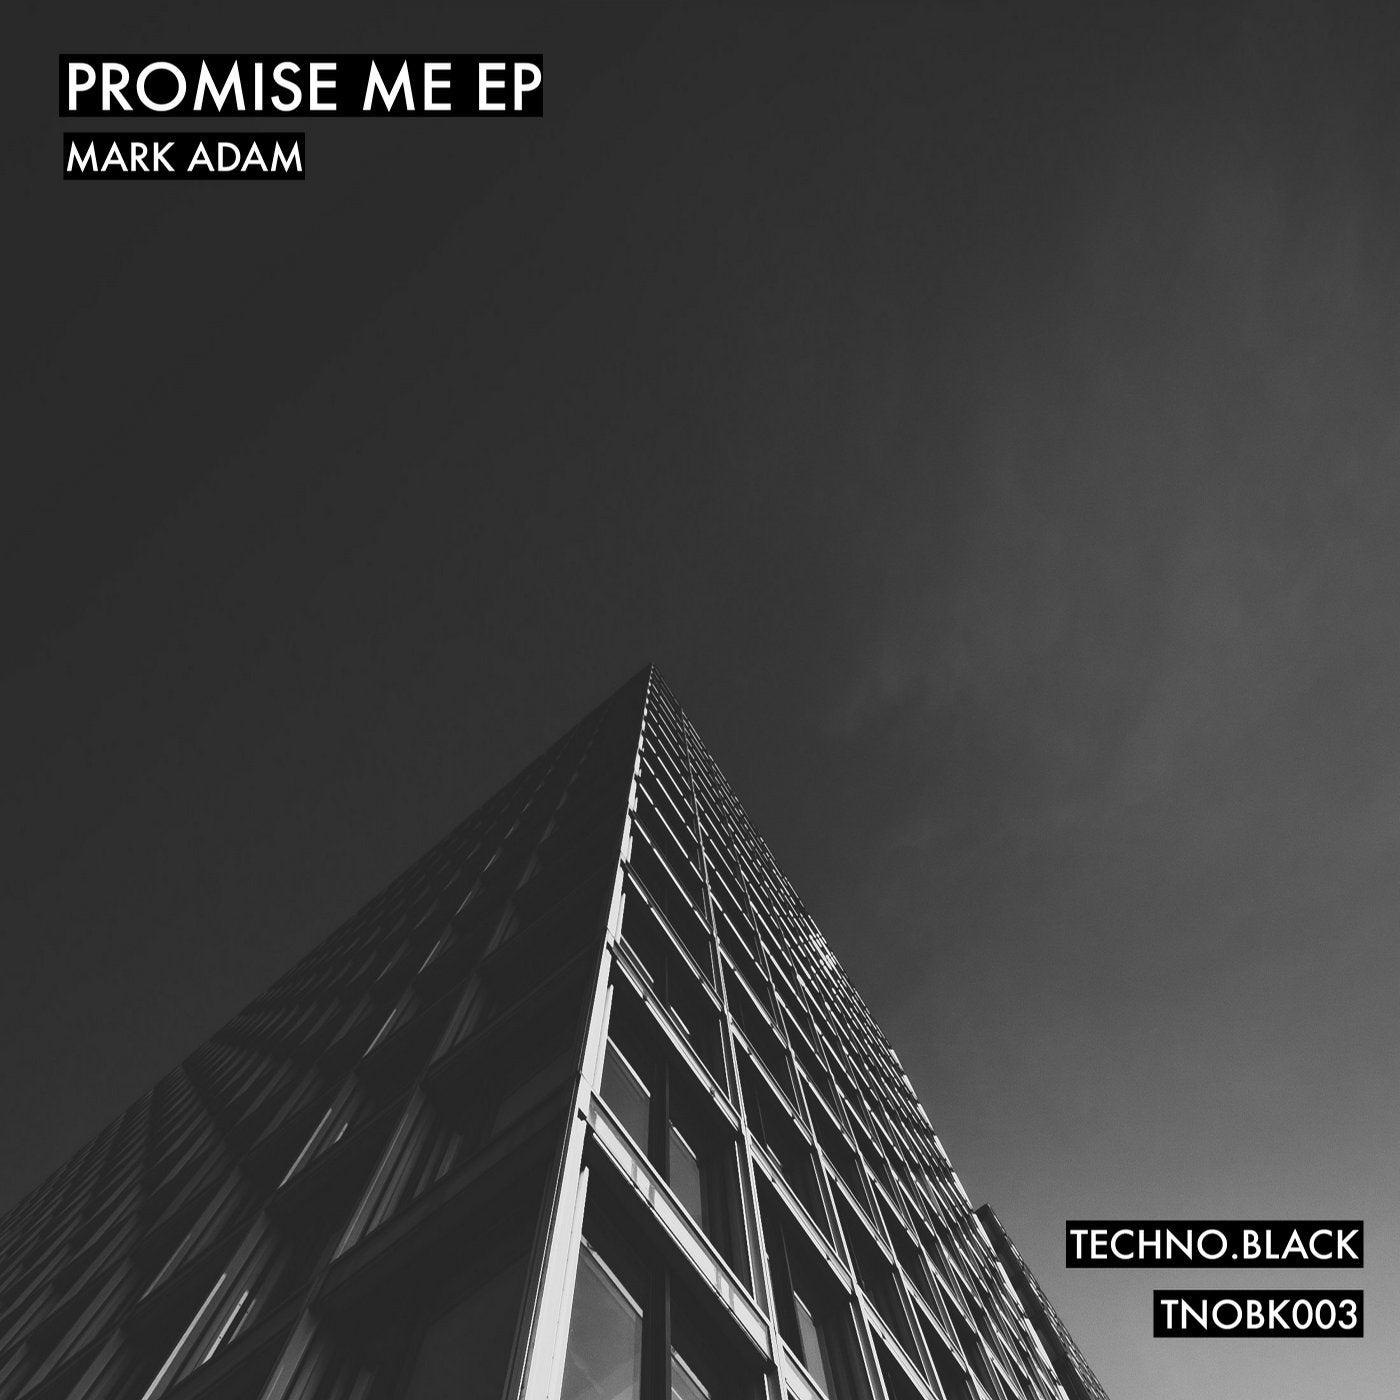 Promise Me EP